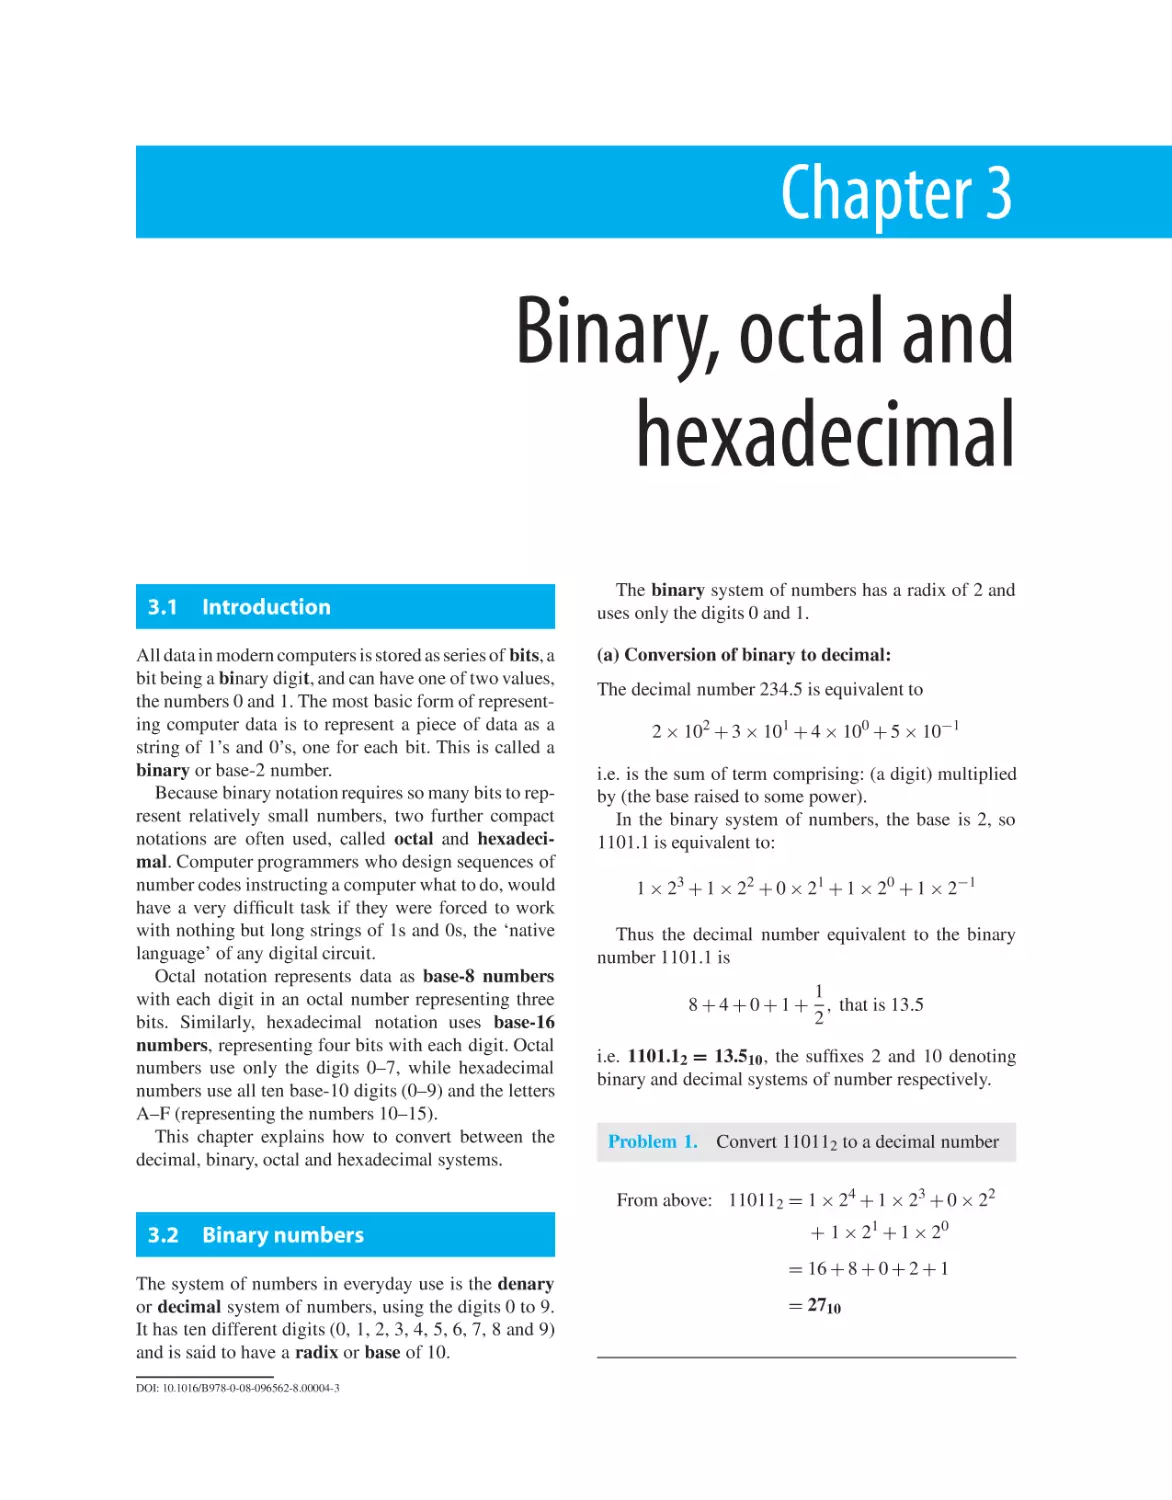 Chapter 3. Binary, octal and hexadecimal
3.1 Introduction
3.2 Binary numbers